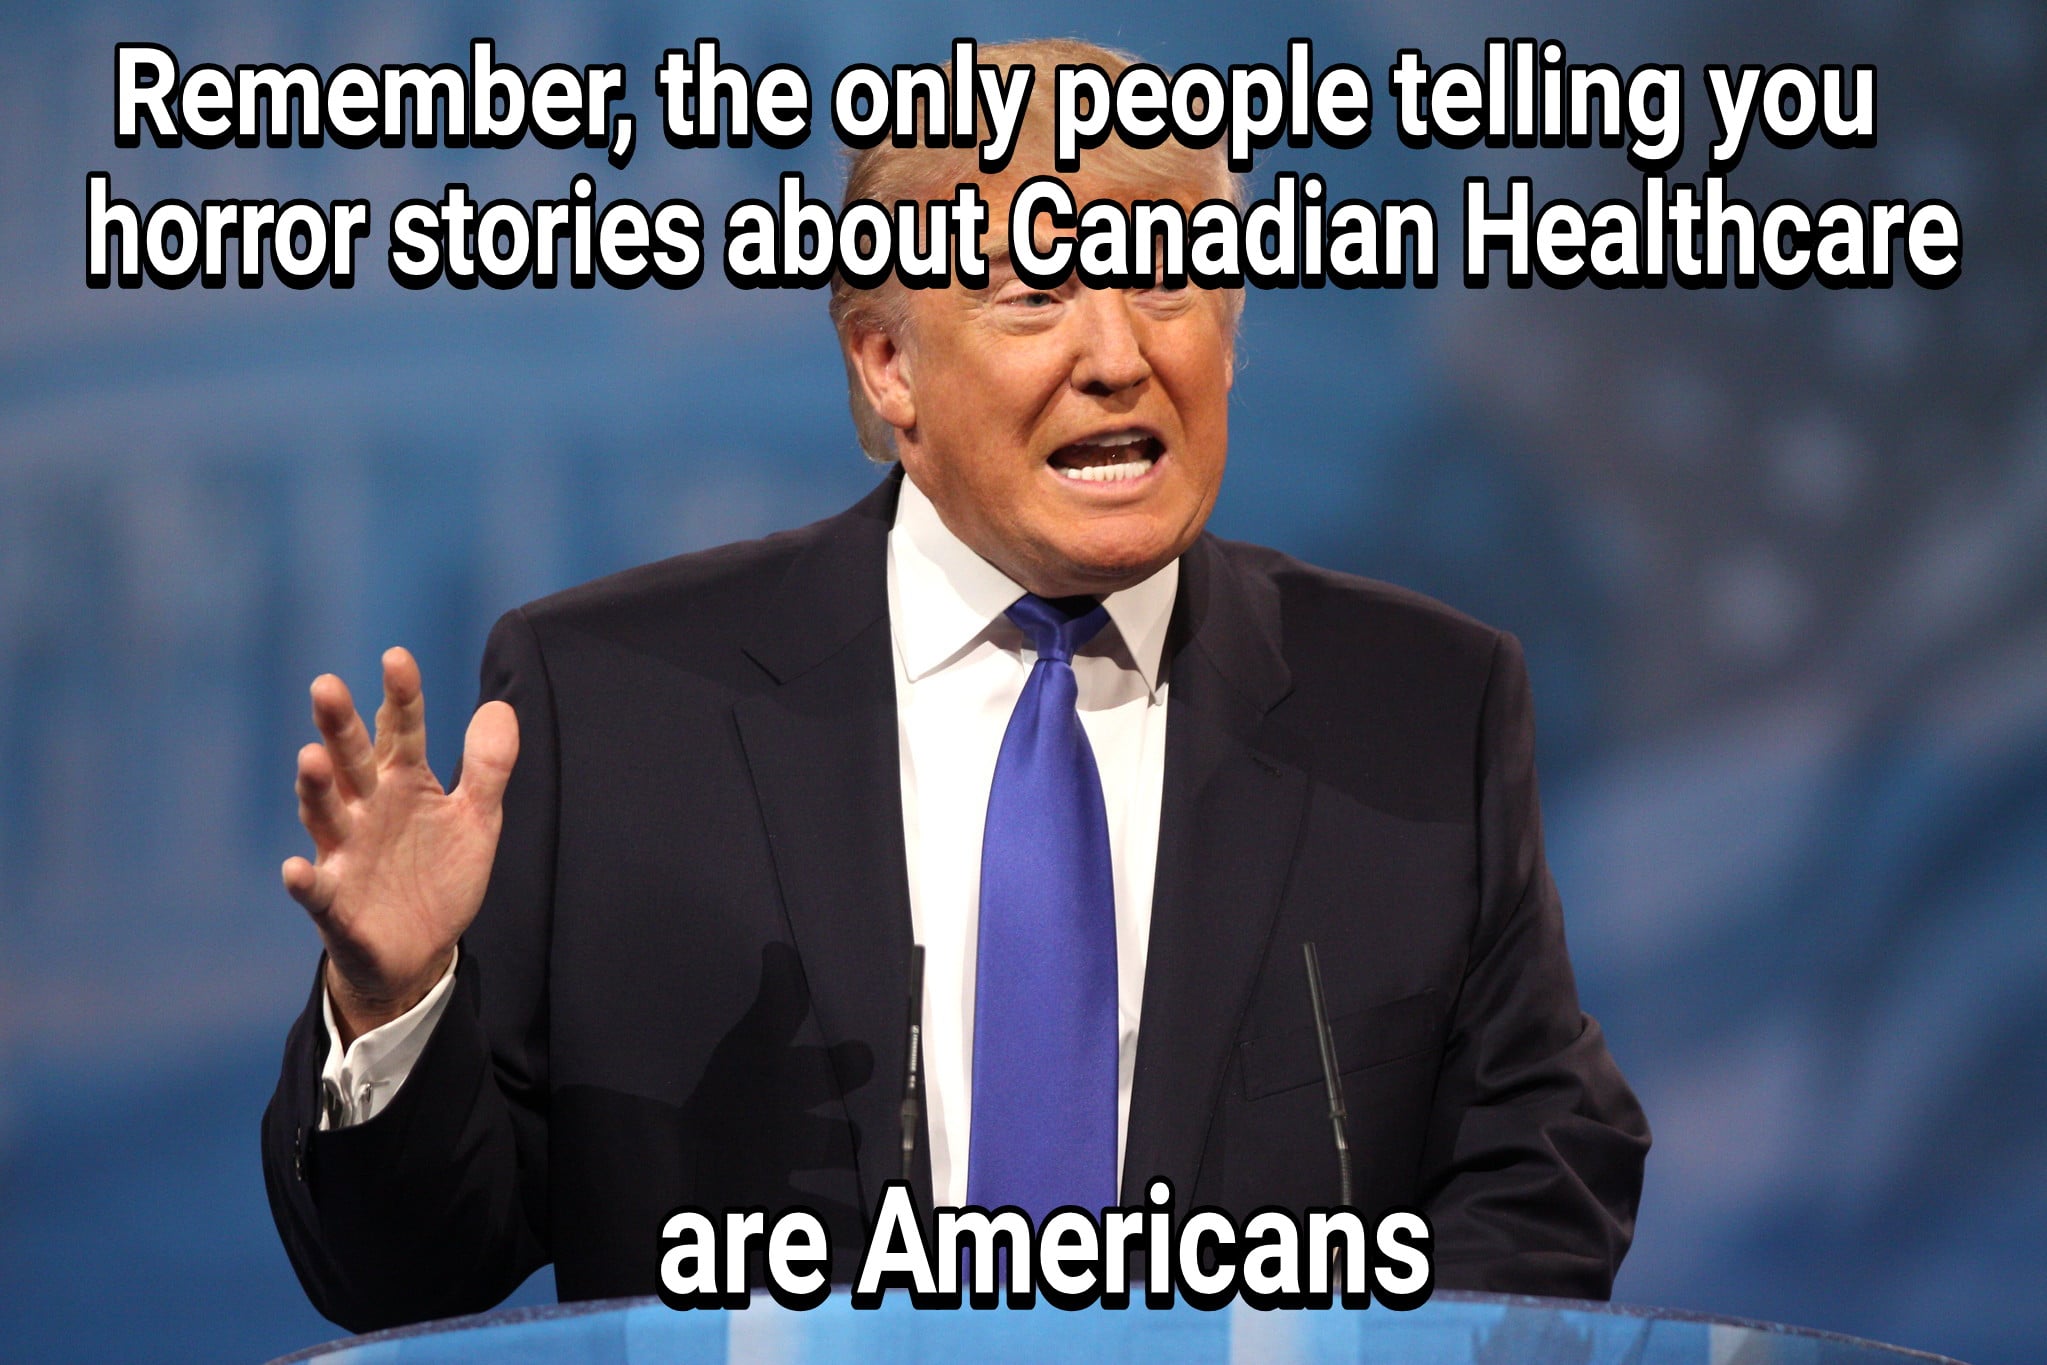 political political-memes political text: Rememberj$$e only people telling you horror stories about Canadian Healthcare are Americans 